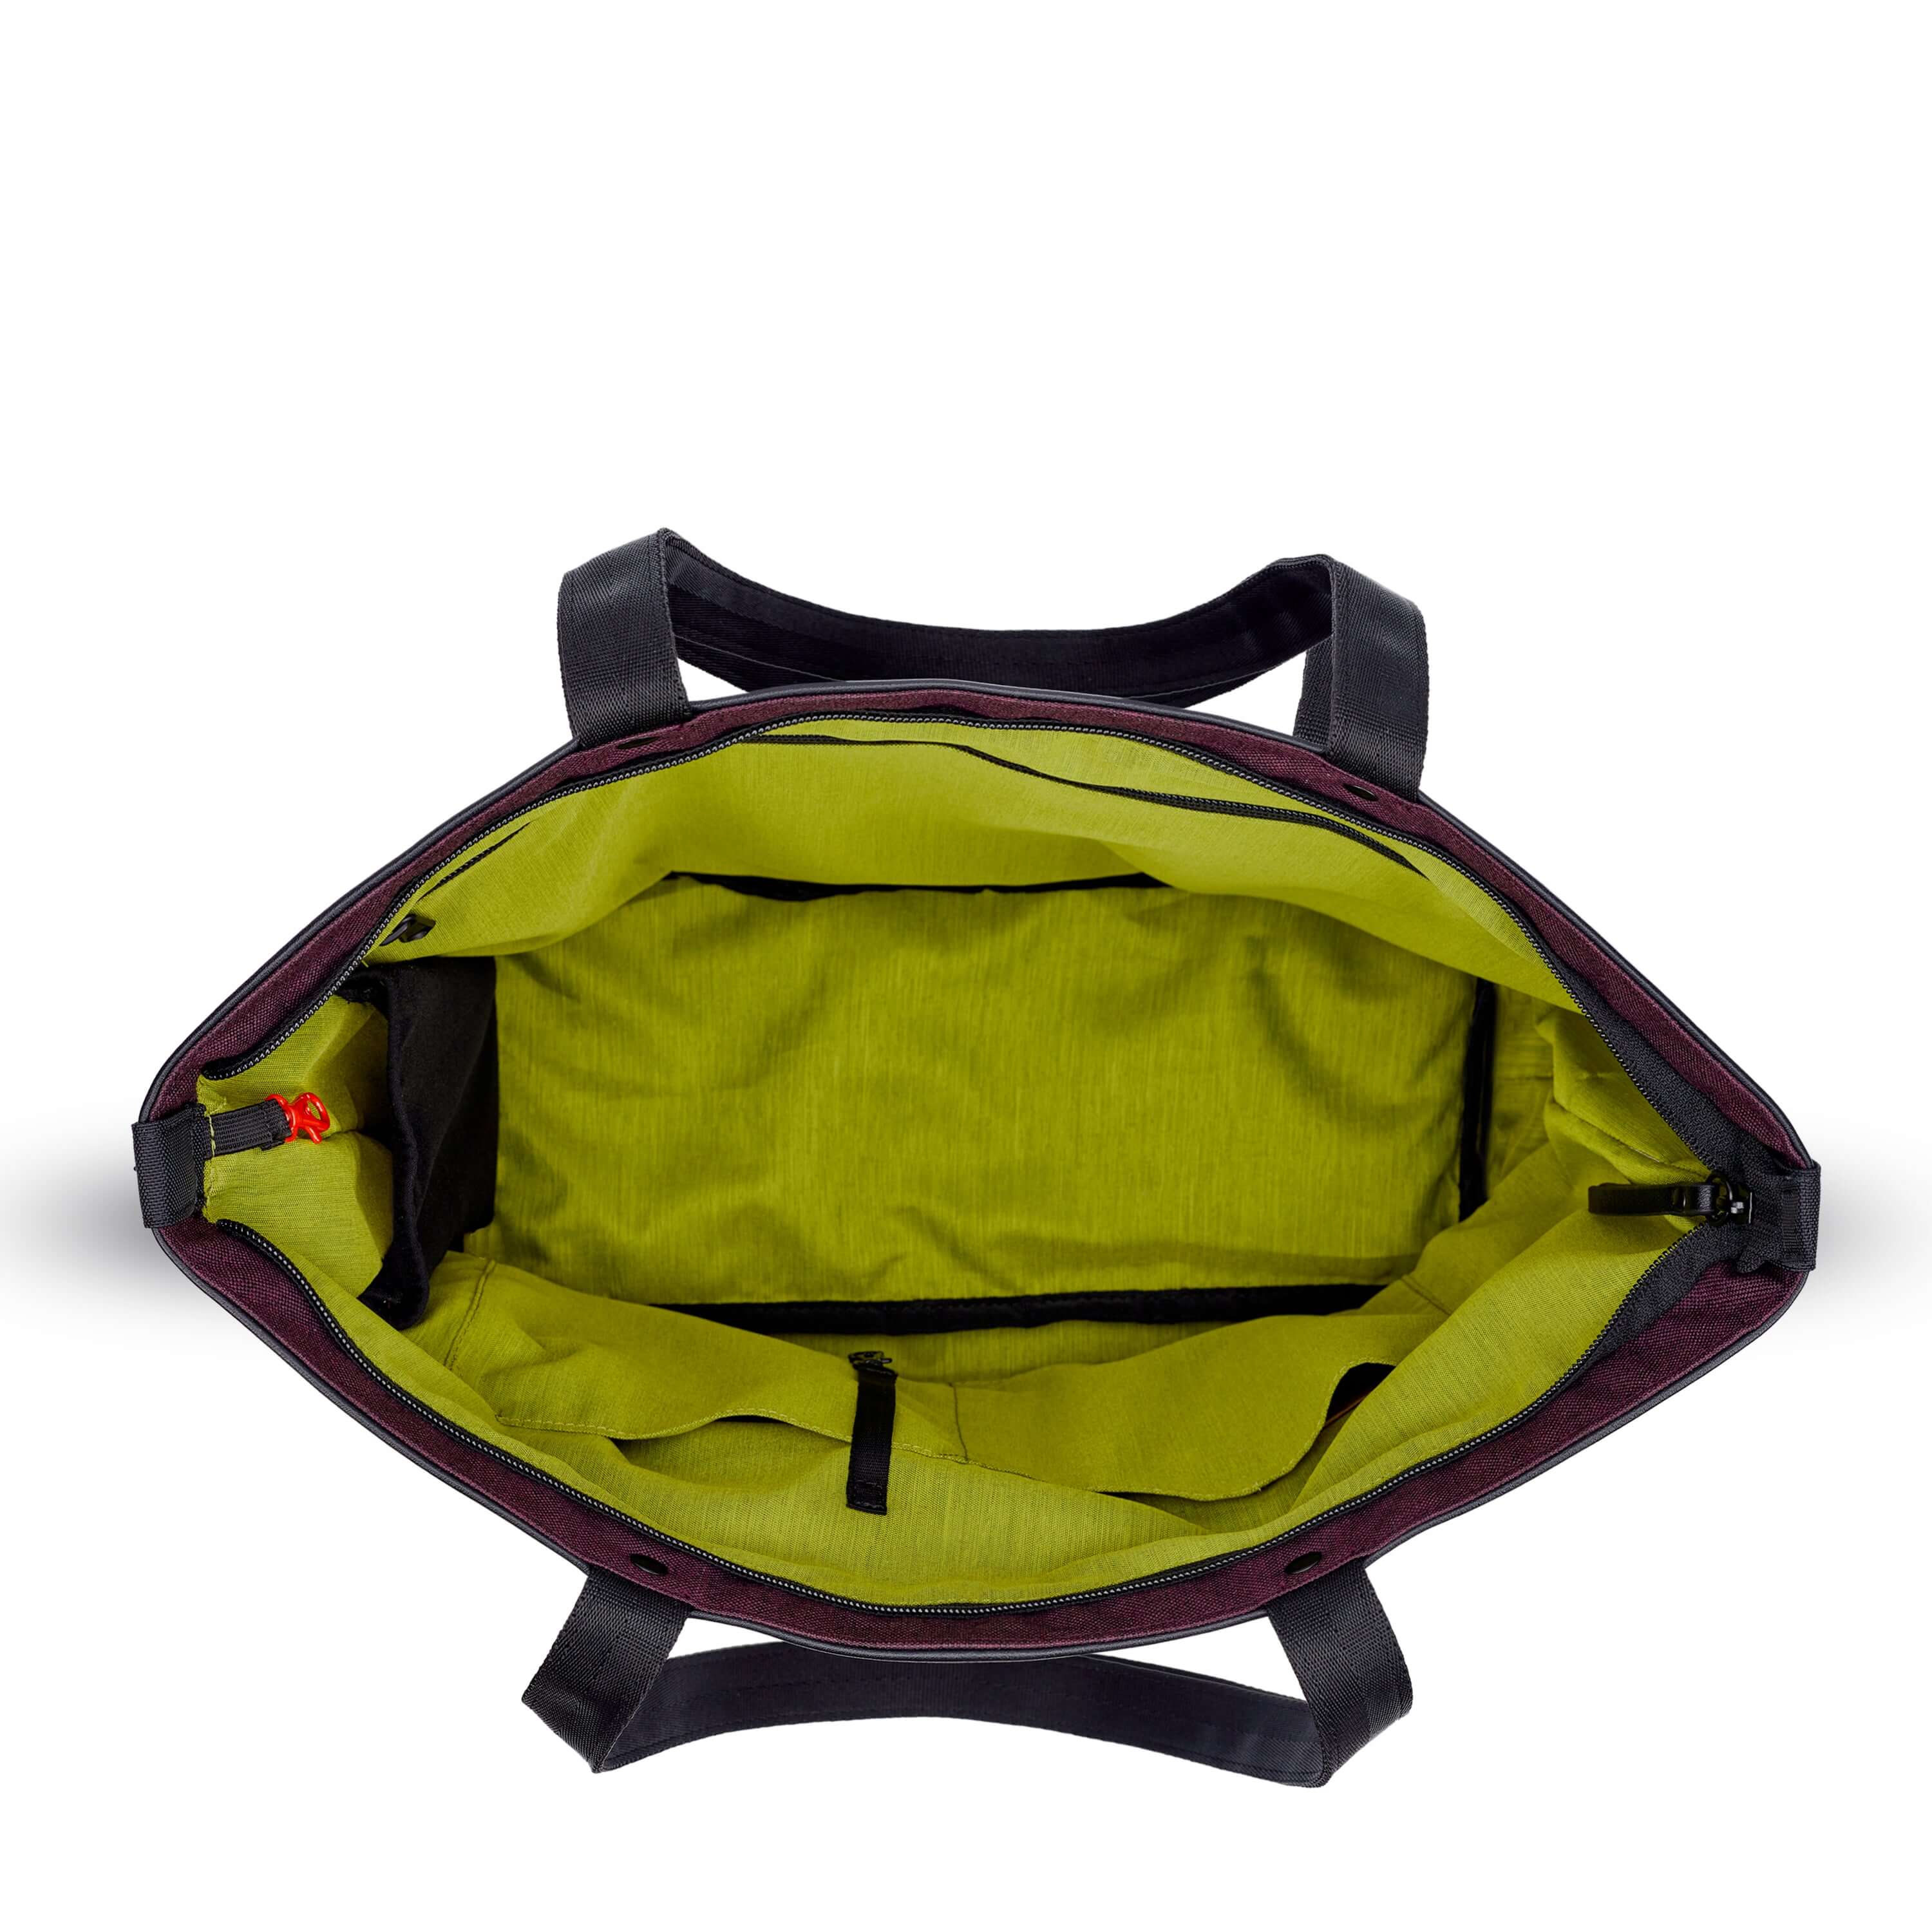 Top view of Sherpani&#39;s Anti-Theft tote the Cali AT in Merlot. The main zipper compartment is open to reveal a lime green interior, an internal water bottle holder and a red carabiner that acts as the zipper lock.